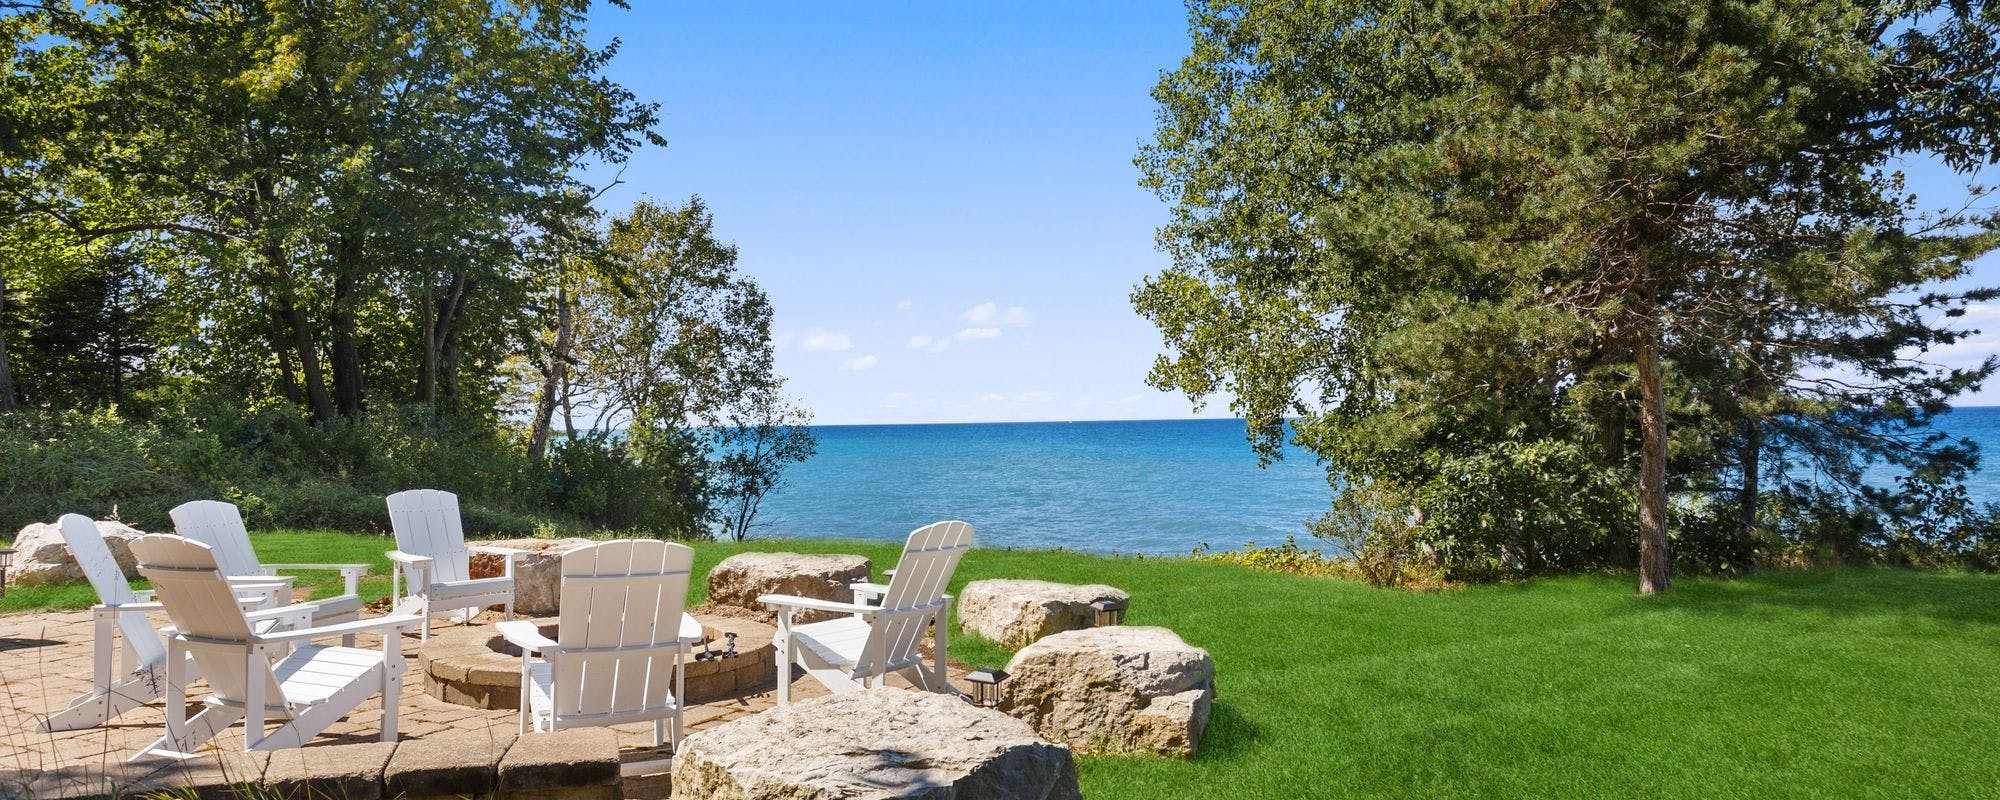 Outdoor seating by the lake at a Southwest Michigan vacation rental